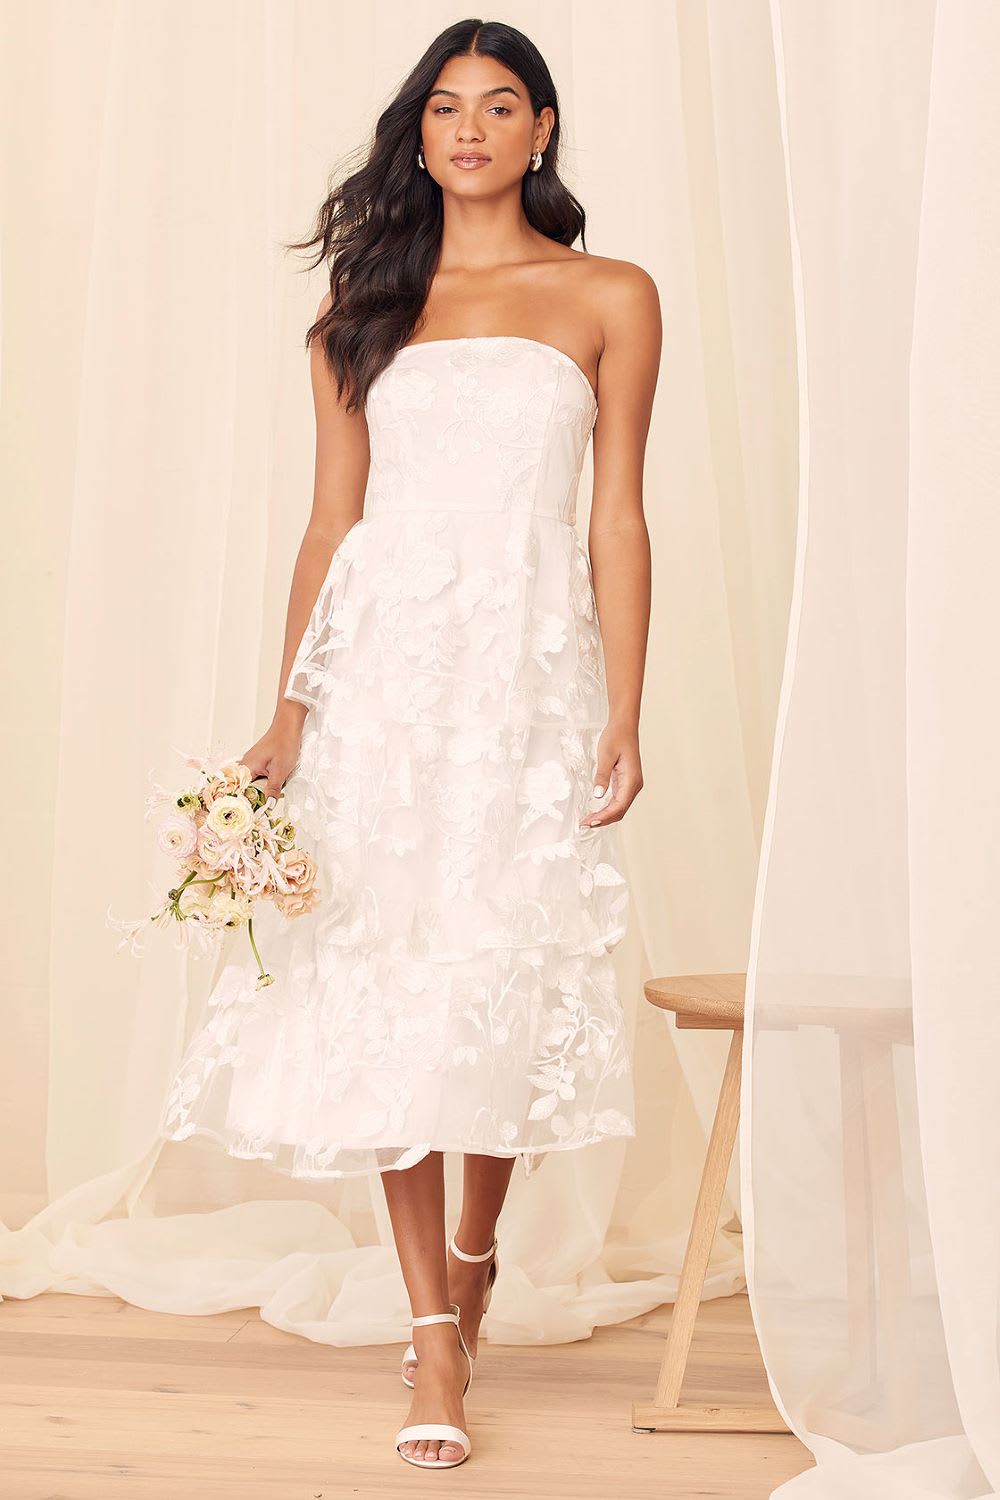 Stunning Civil Wedding Dress Picks For Your Courthouse Nuptials - Lulus